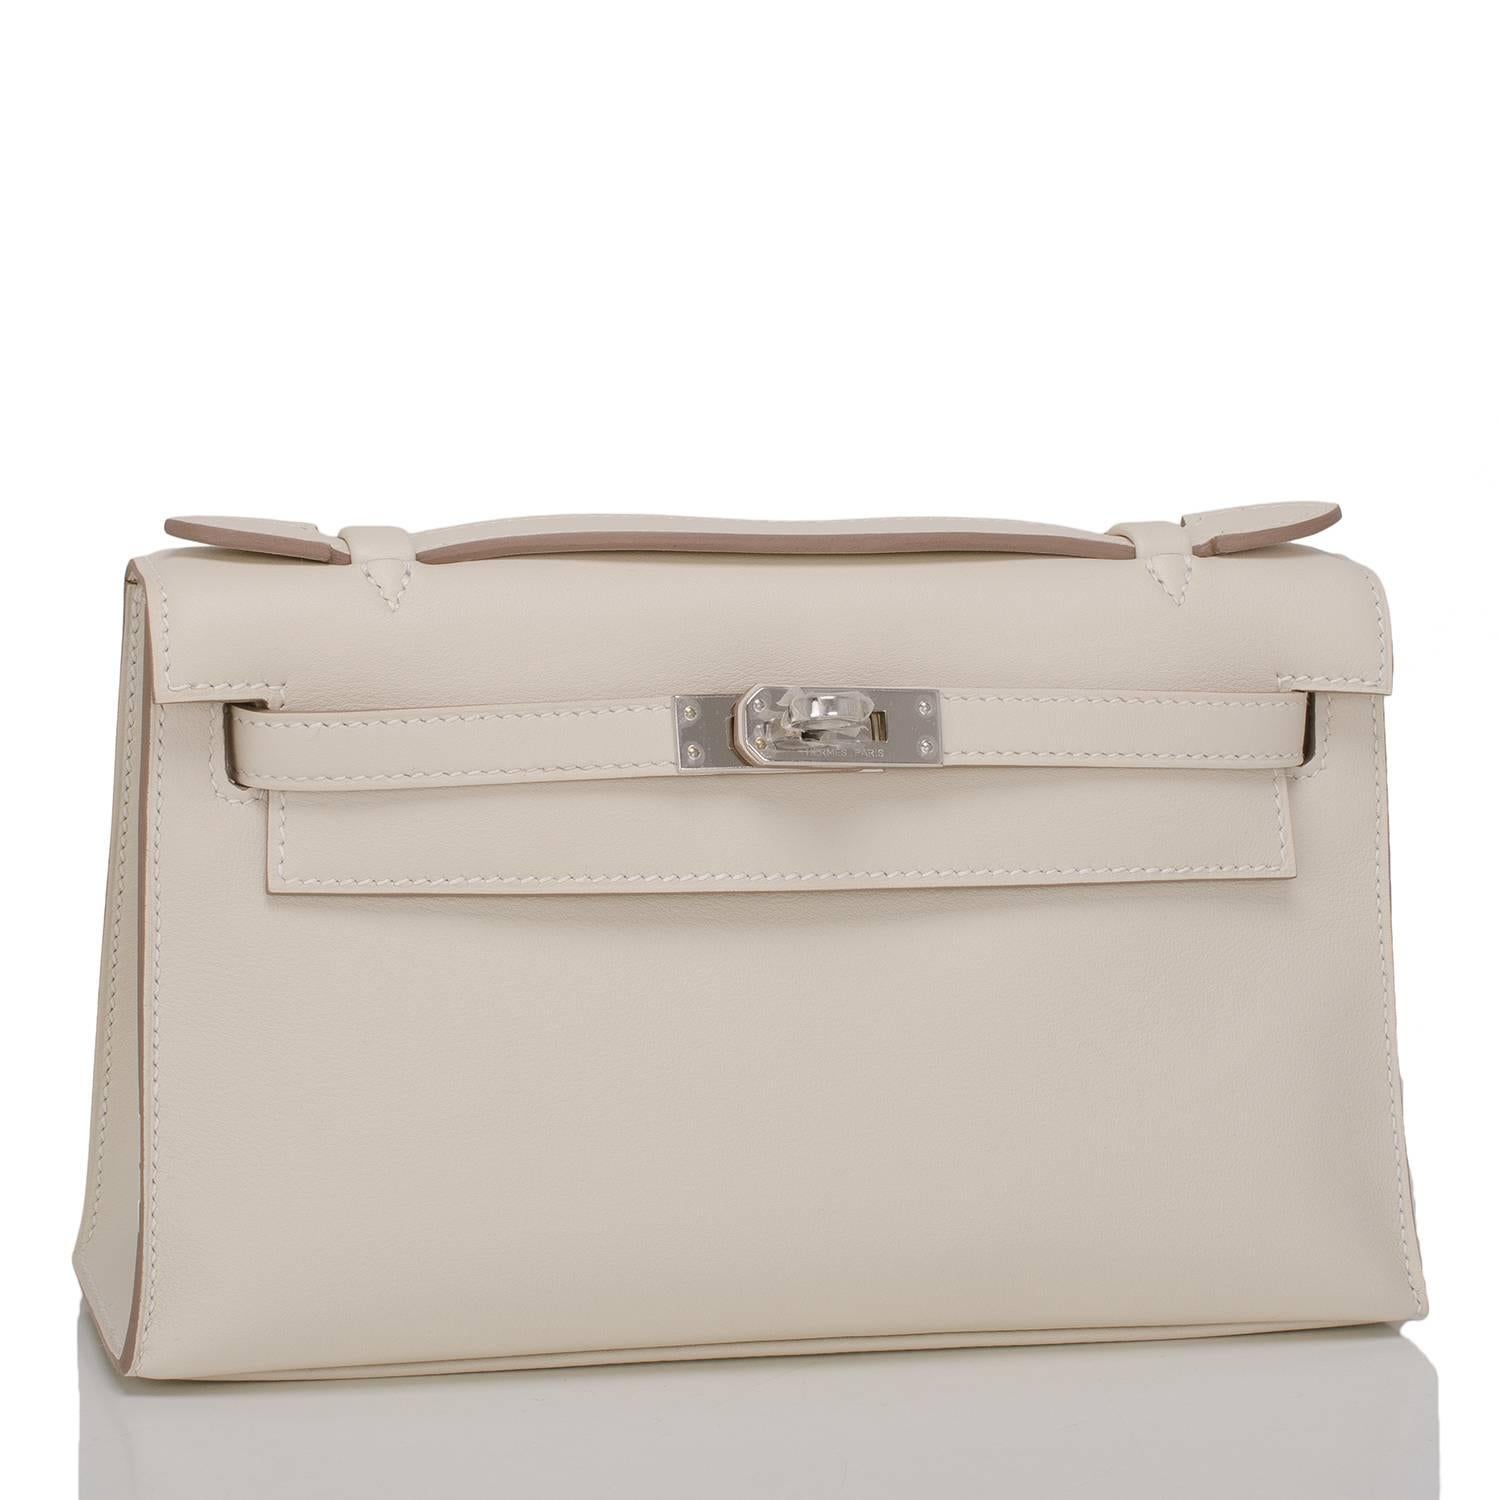 Hermes Craie Mini Kelly Pochette in swift leather with palladium hardware.

This Hermes Kelly Pochette has tonal stitching, a front flap with two straps, a toggle closure and a single flat handle.

The interior is lined with craie chevre and has